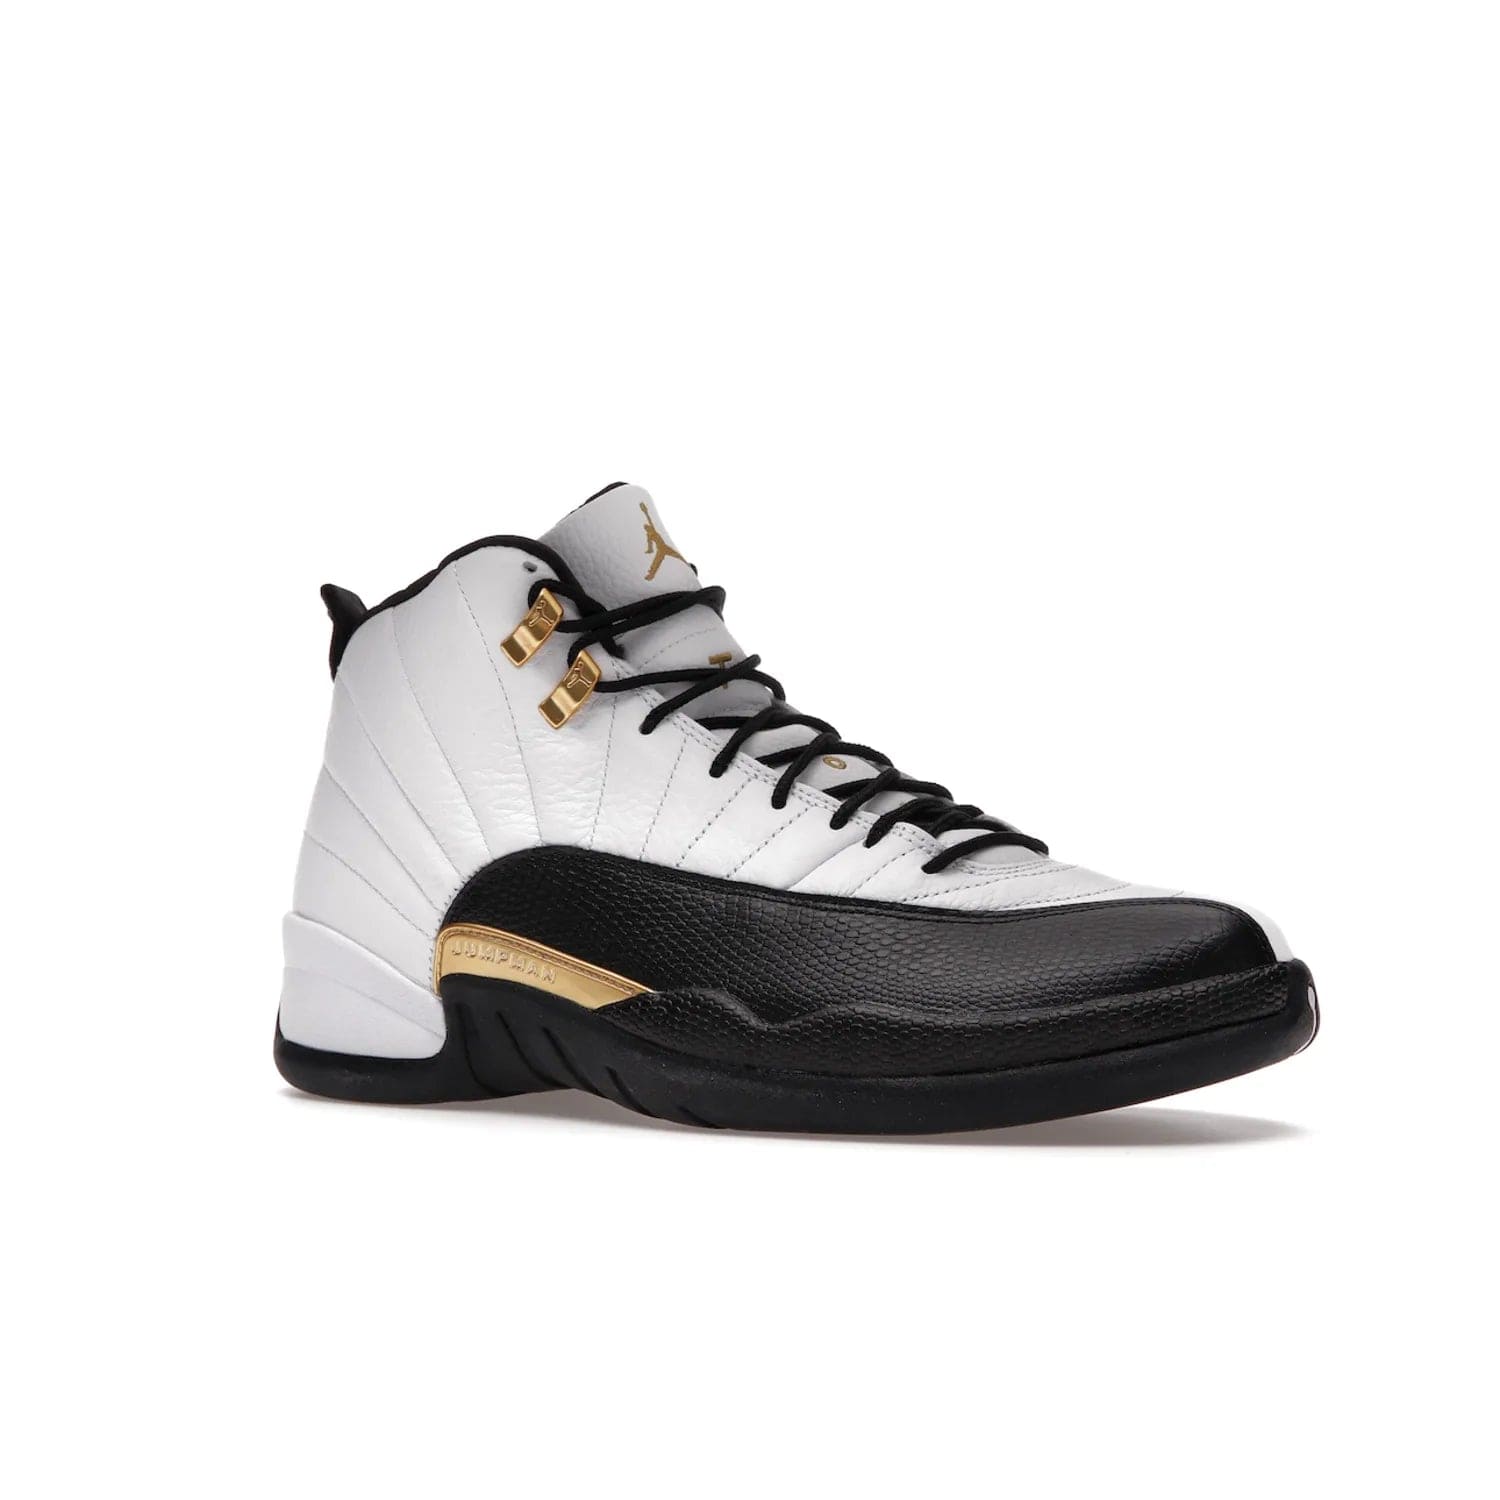 Jordan 12 Retro Royalty Taxi - Image 4 - Only at www.BallersClubKickz.com - Make a statement with the Air Jordan 12 Retro Royalty Taxi. Woven heel tag, gold plaquet, white tumbled leather upper plus a black toe wrap, make this modern take on the classic a must-have. Available in November 2021.